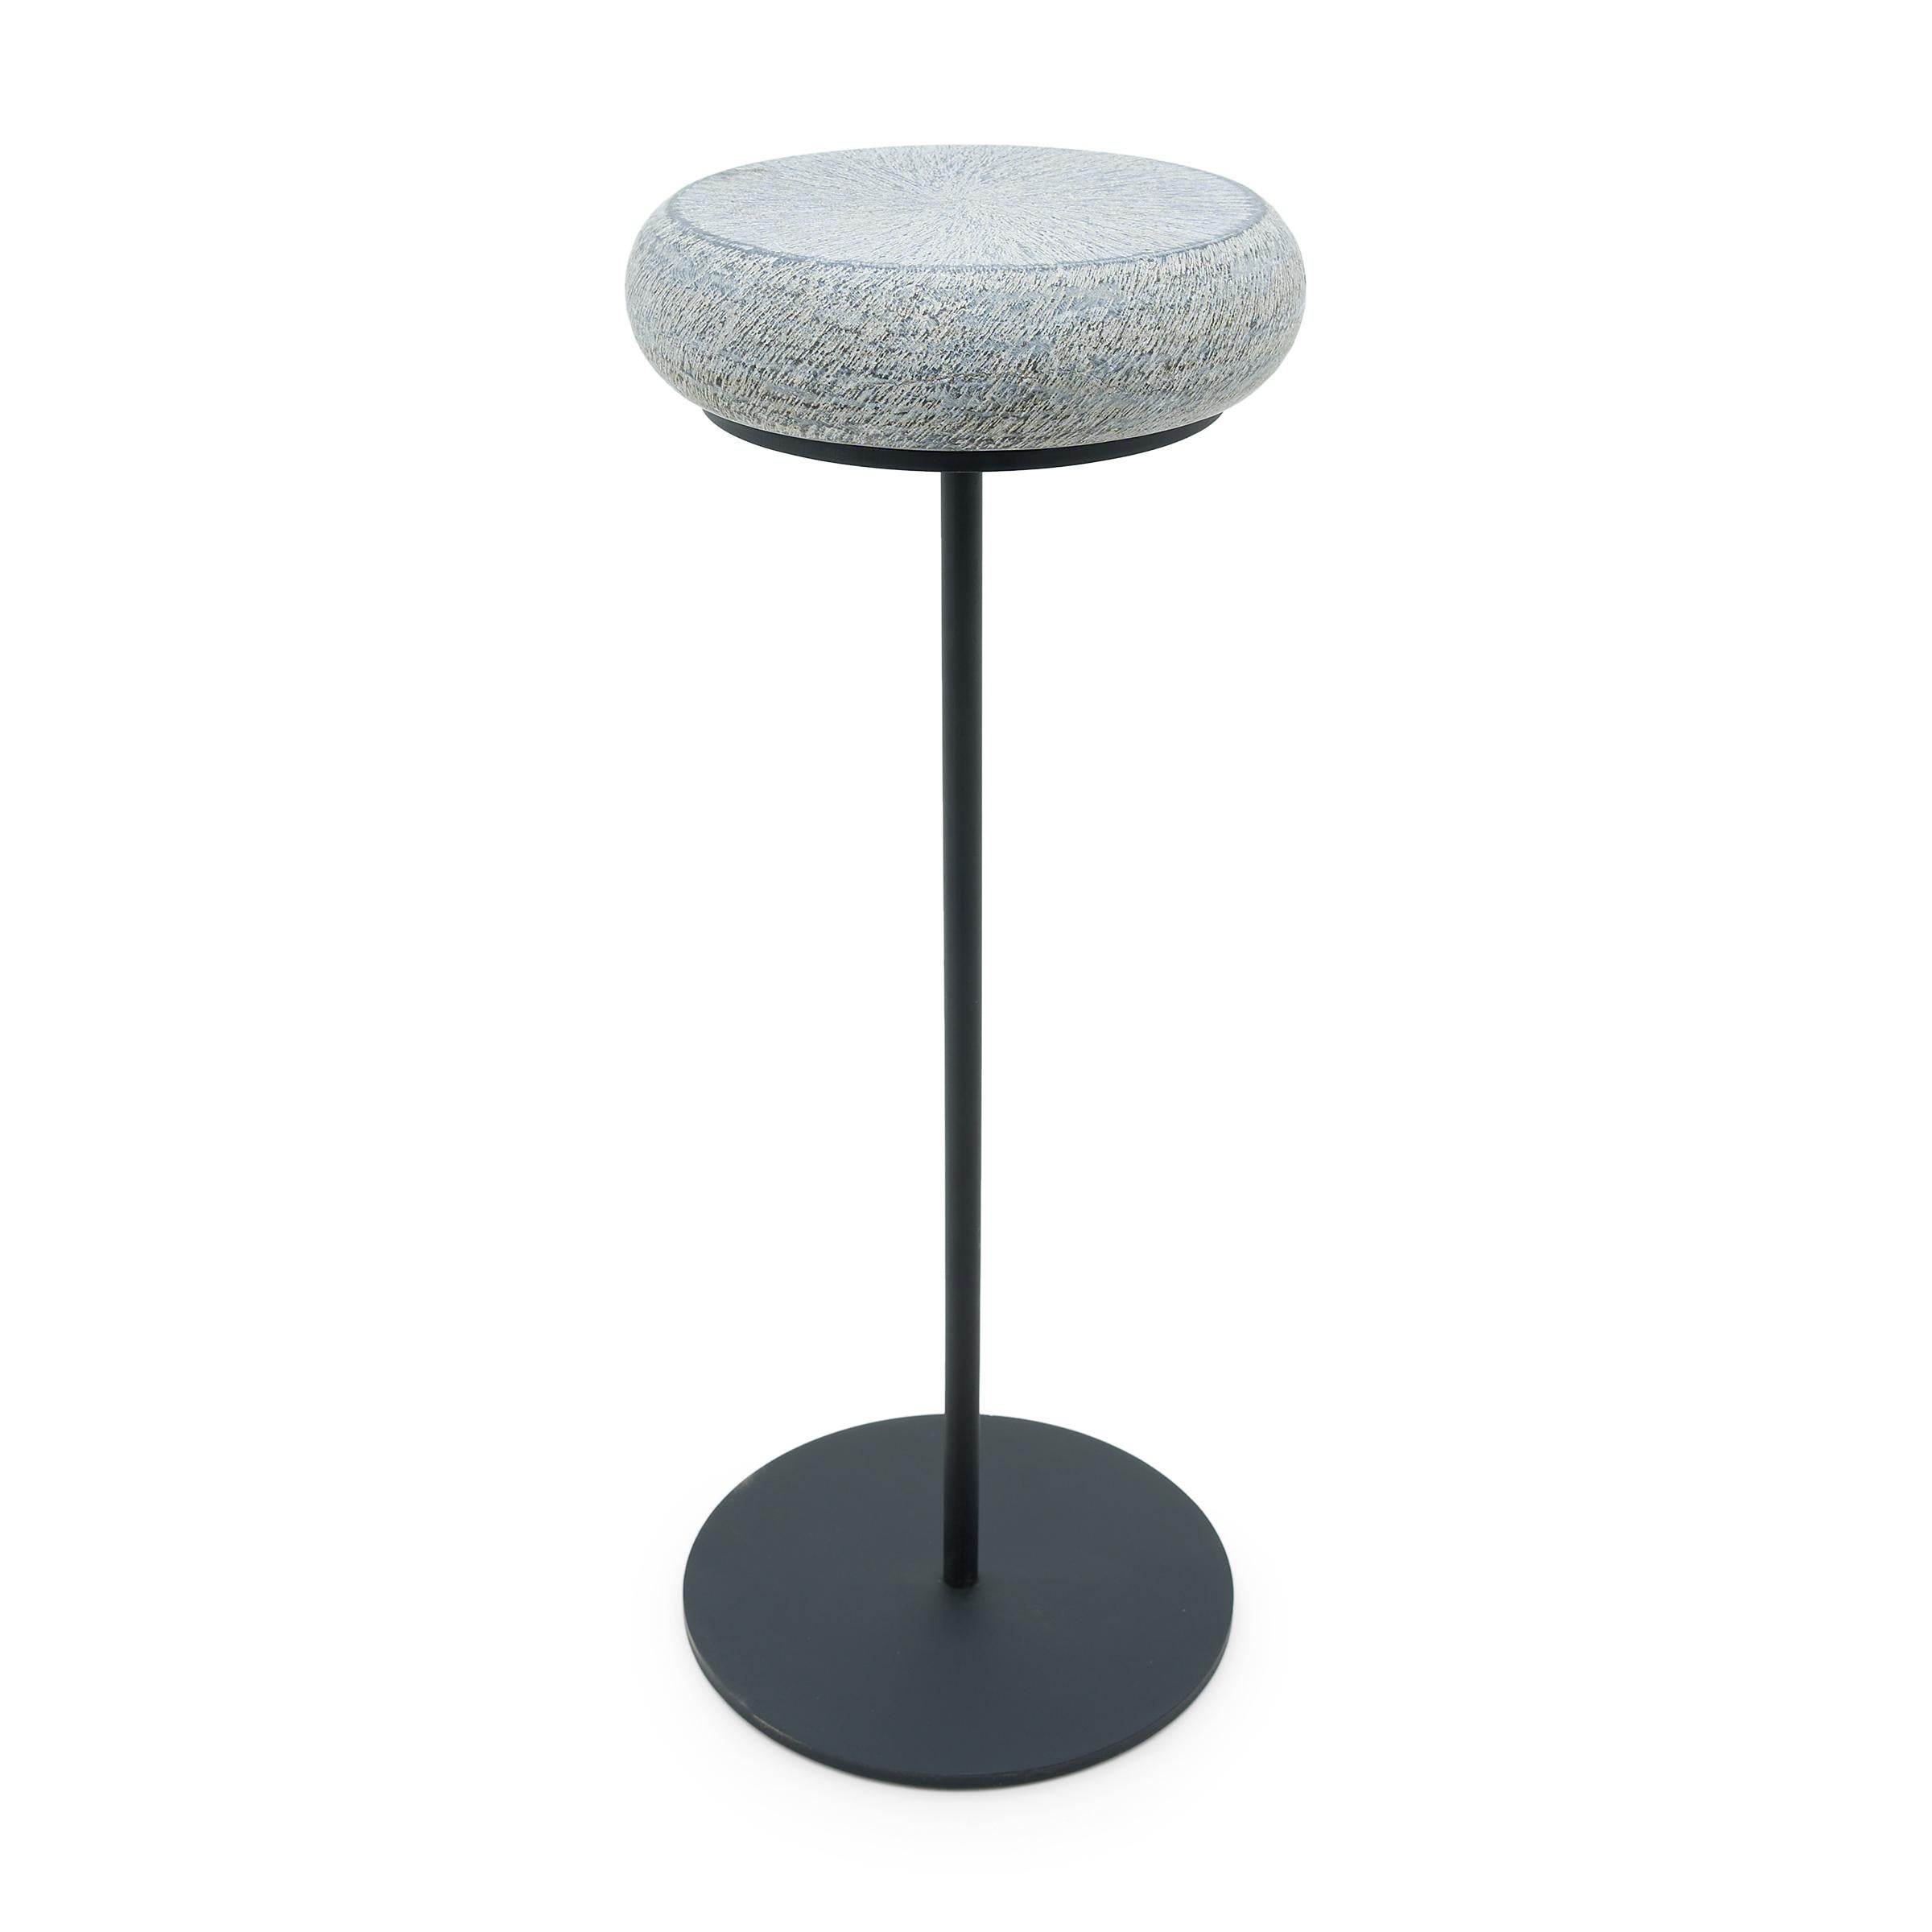 Chinese Petite Drum Stone Side Table For Sale